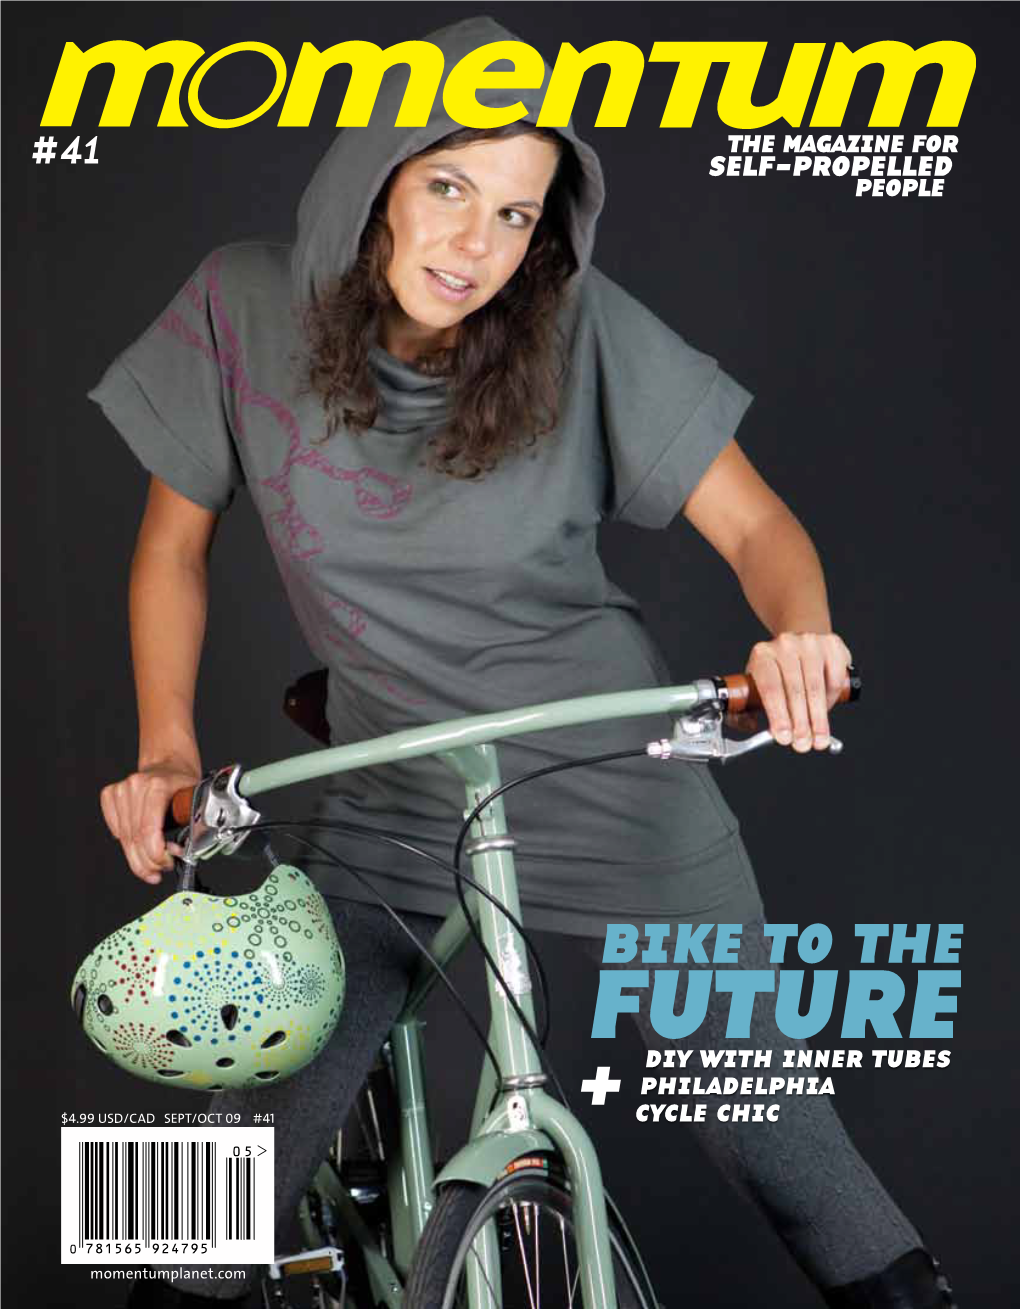 Bike to the Diy with Inner Tubes + Philadelphia $4.99 USD/CAD SEPT/OCT 09 #41 Cycle Chic